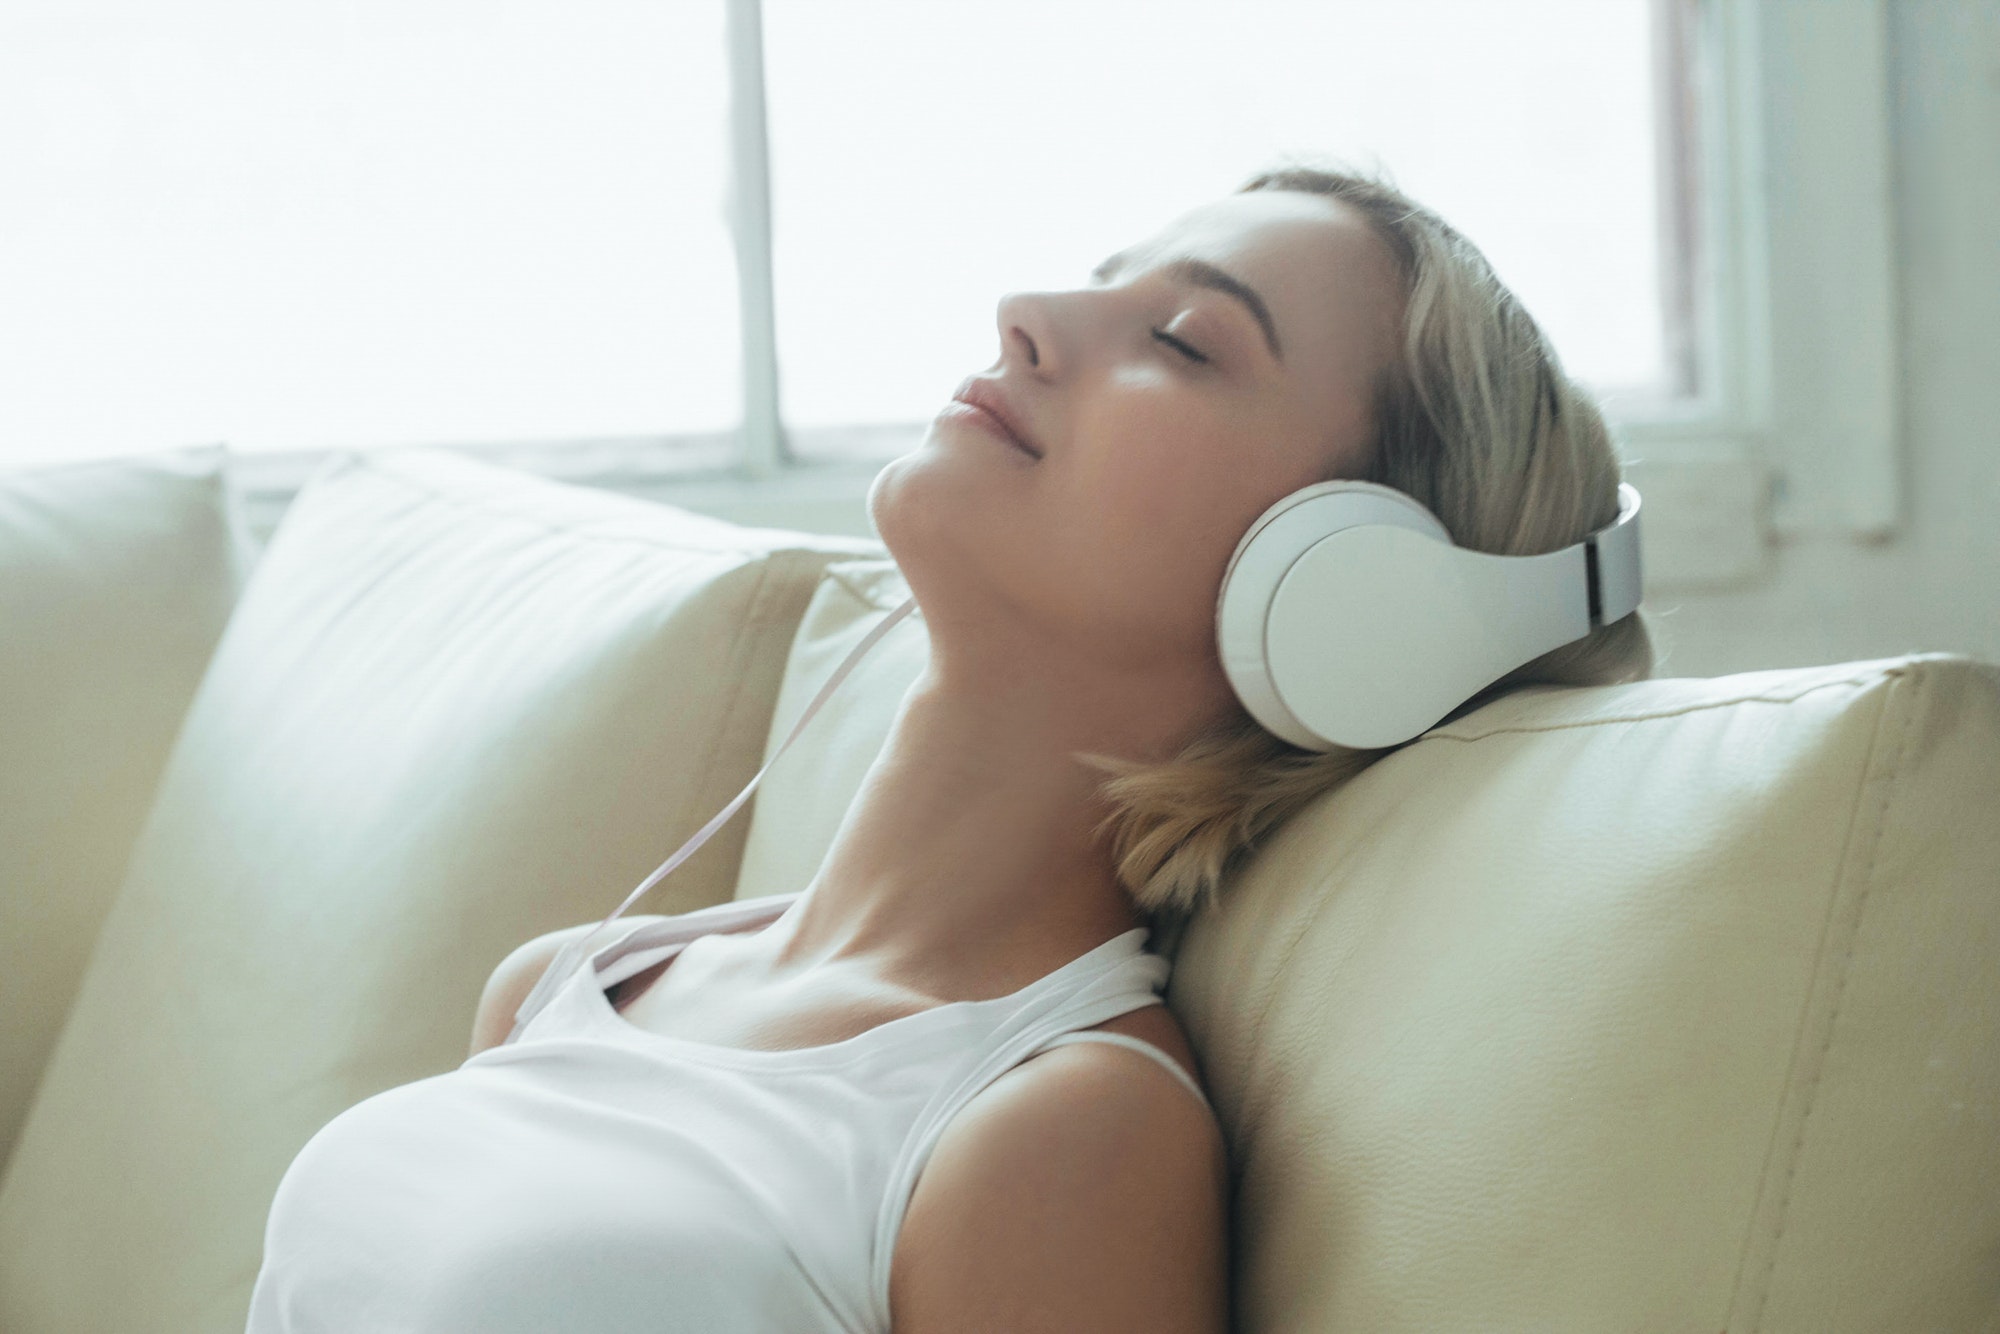 Woman in headphones at home listening to music, relax alone close up portrait.